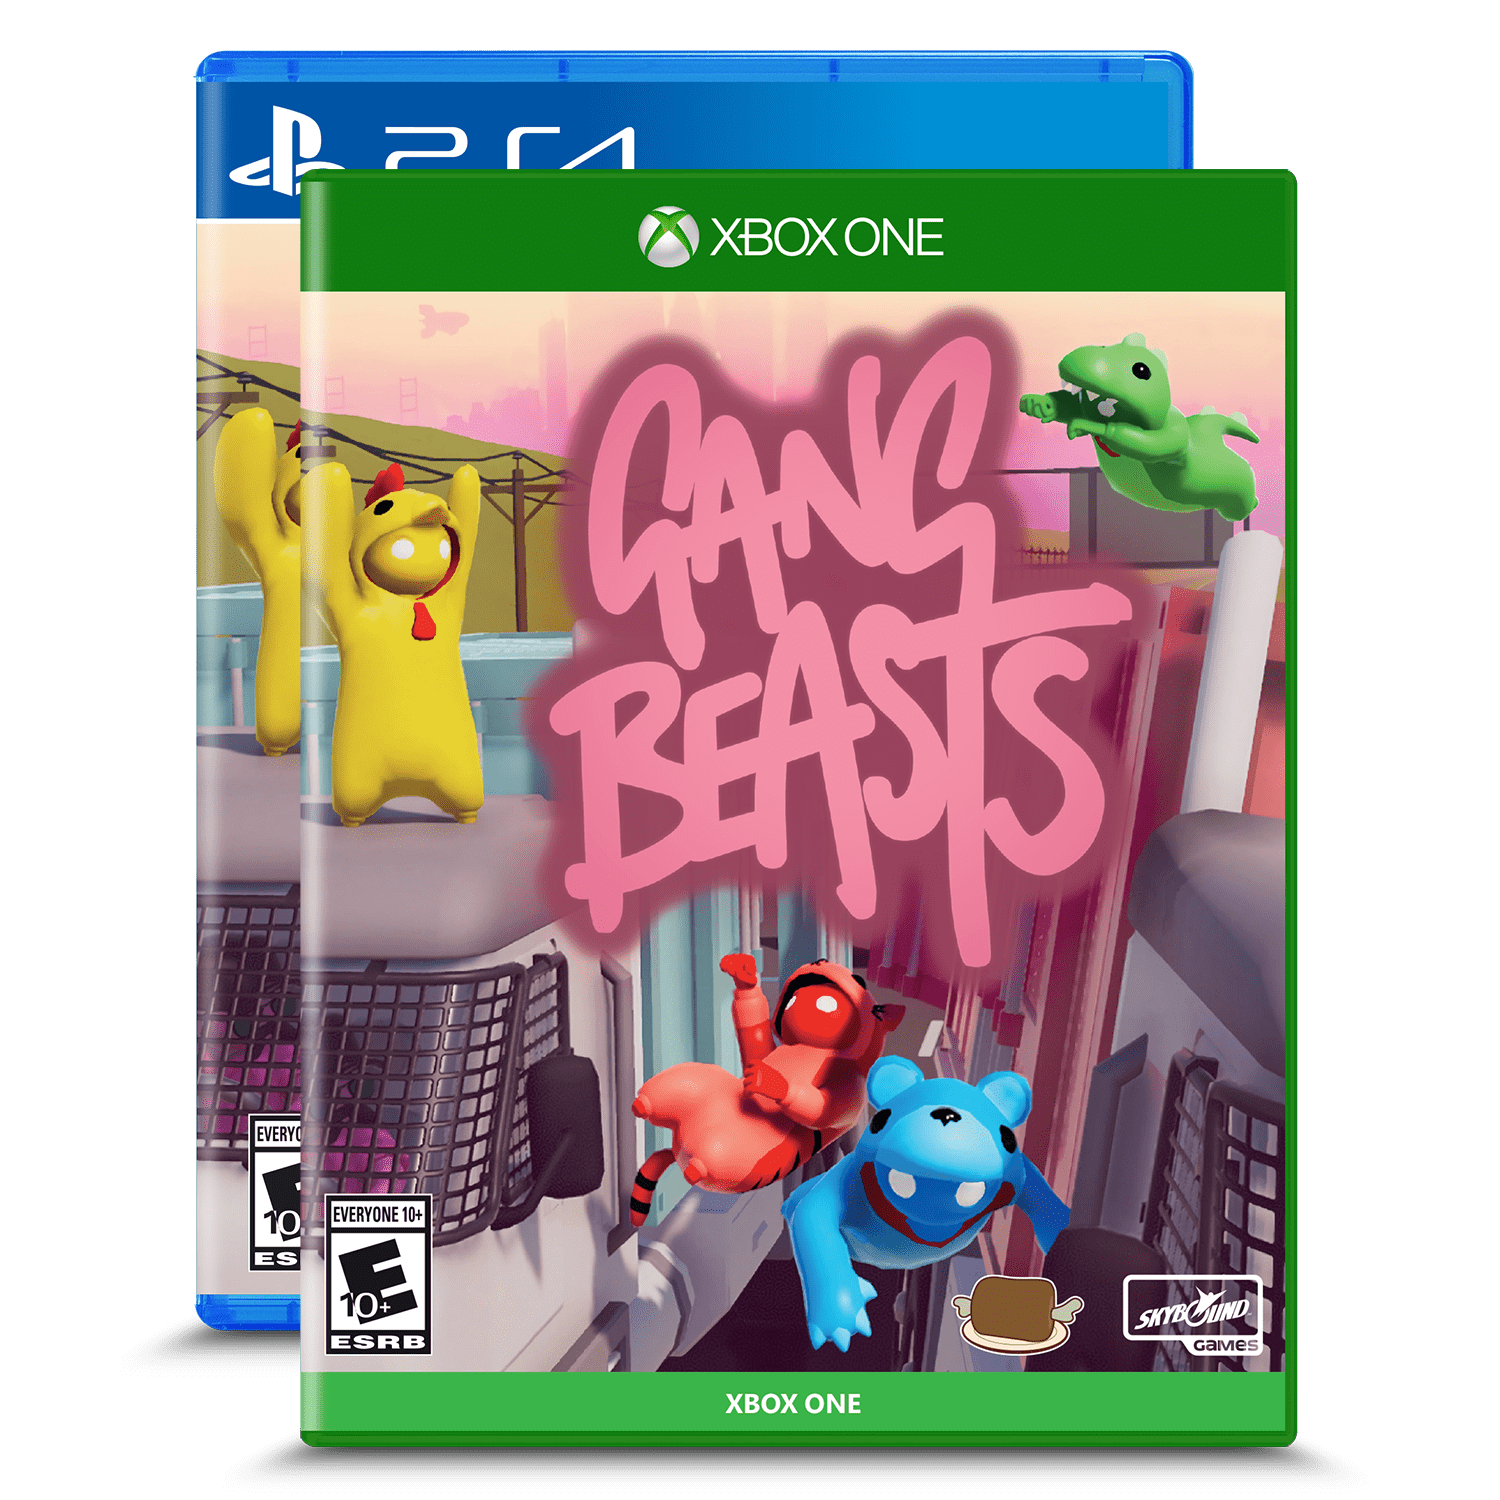 can u get gang beasts on xbox one